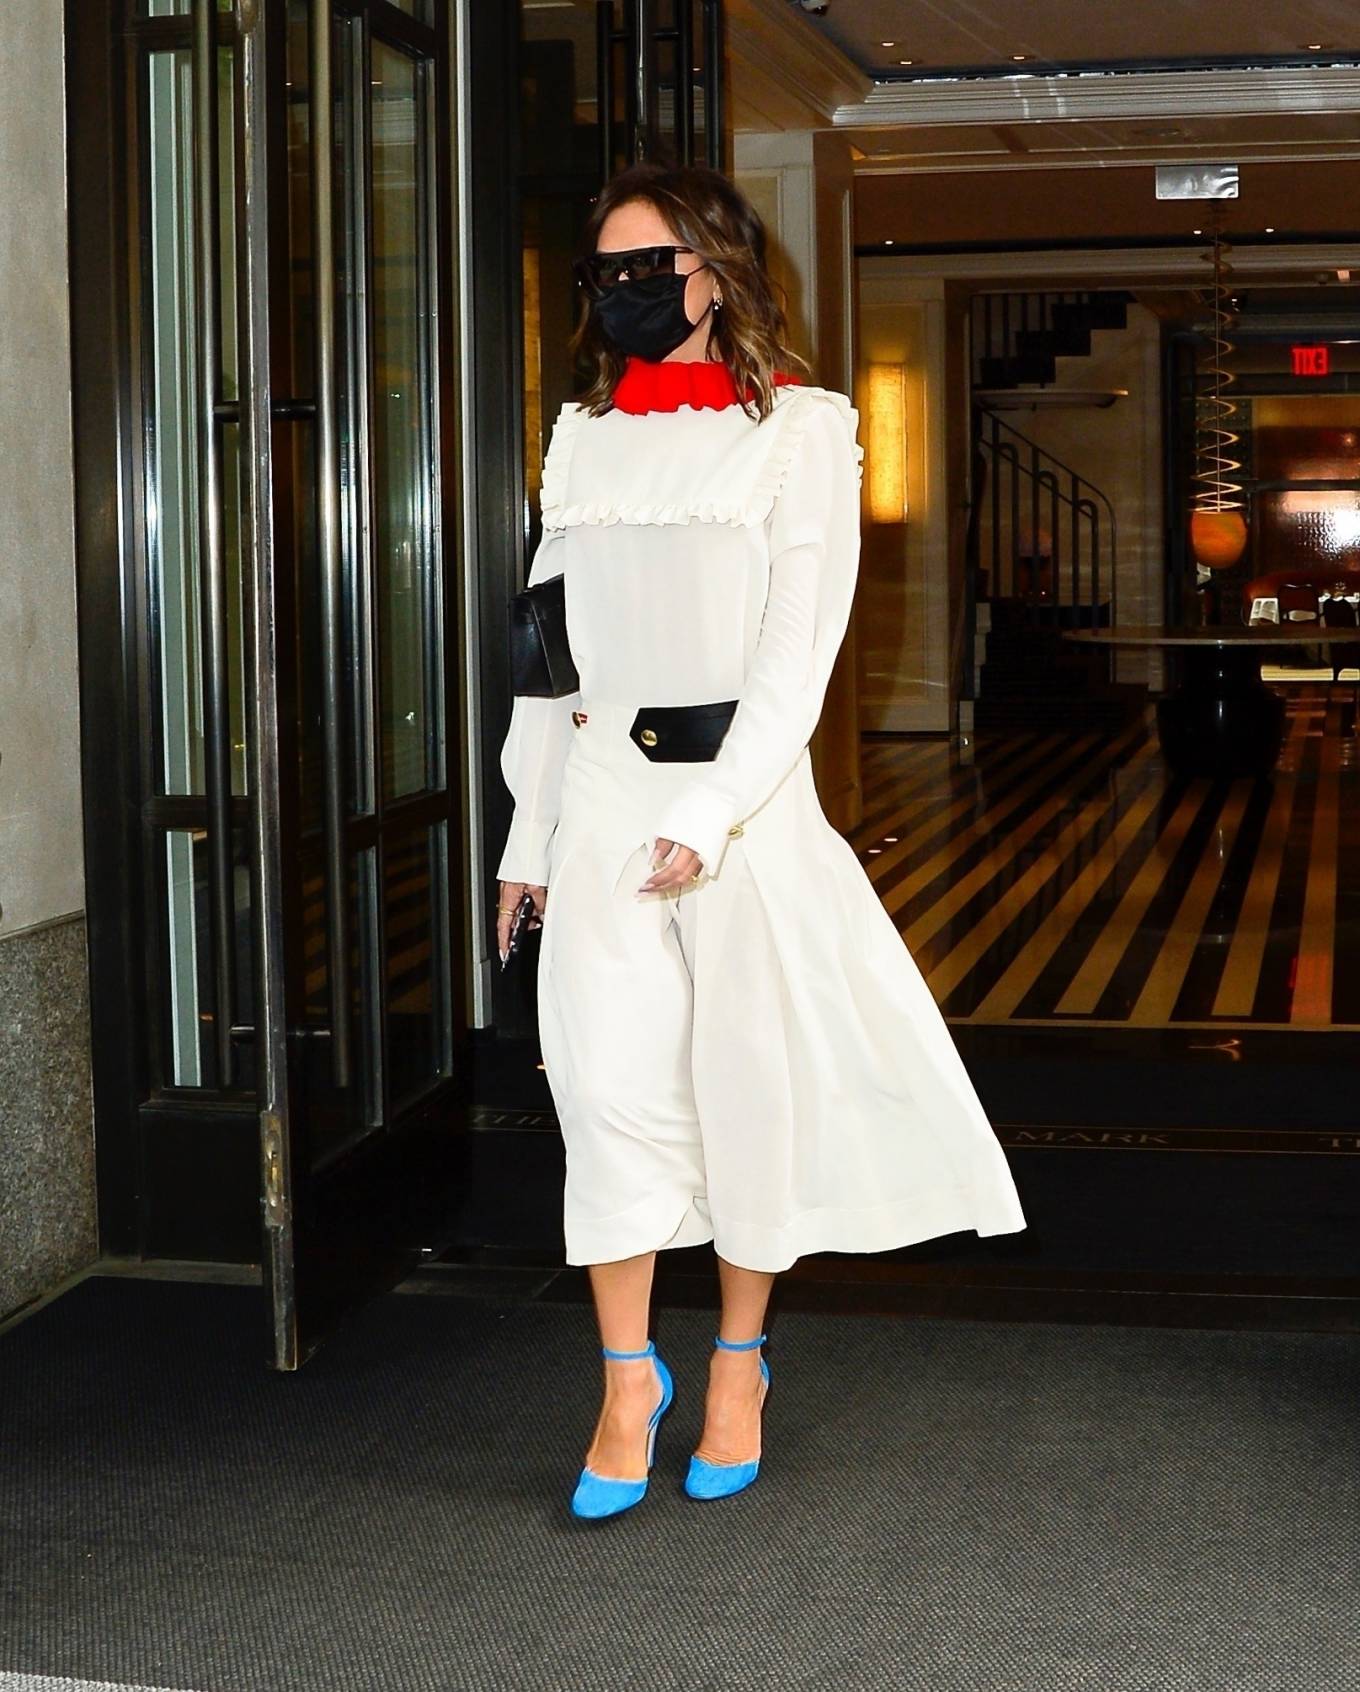 Victoria Beckham 2021 : Victoria Beckham – In white maxi dress steps out in New York-03